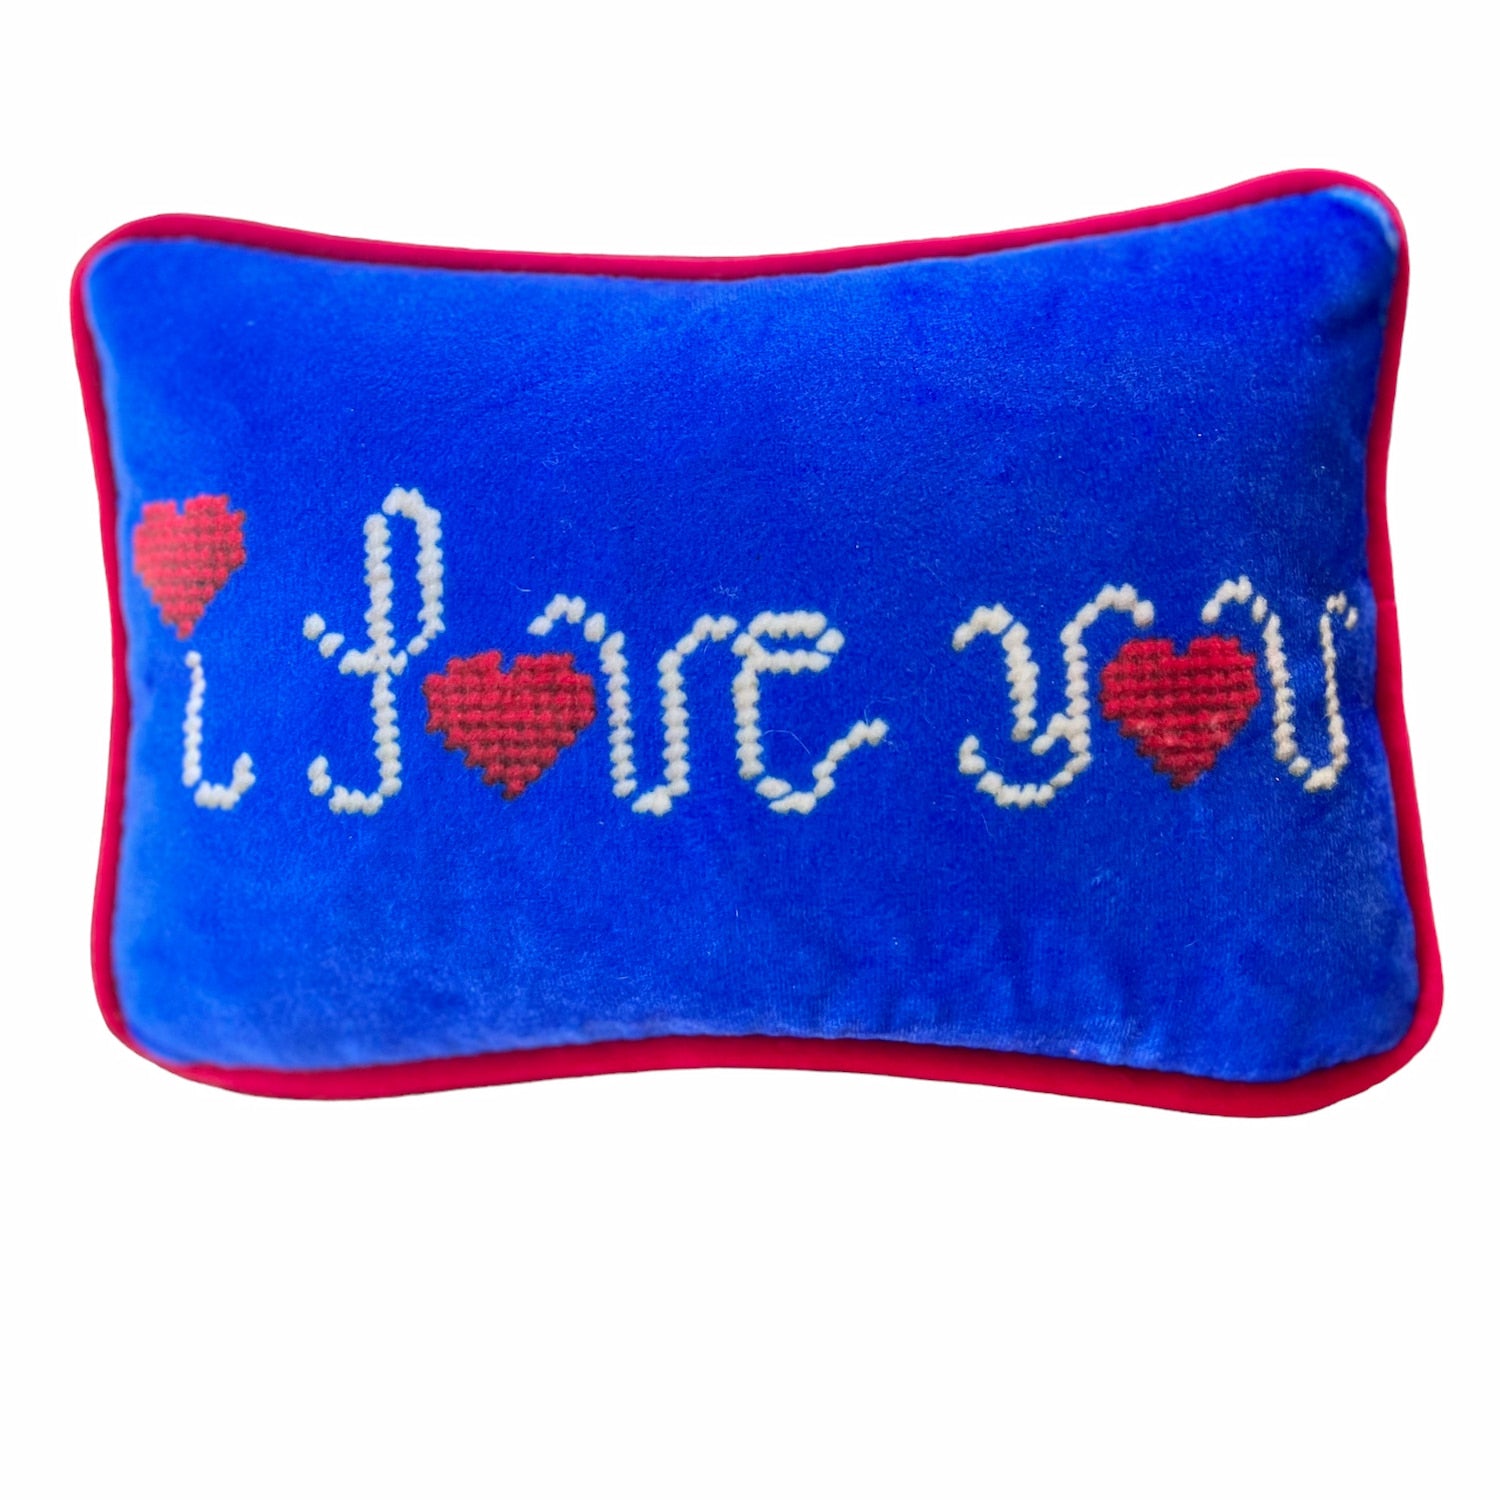 blue velvet pillow with I LOVE YOU written cursive script, the dot on the i and o in love and you is a red heart